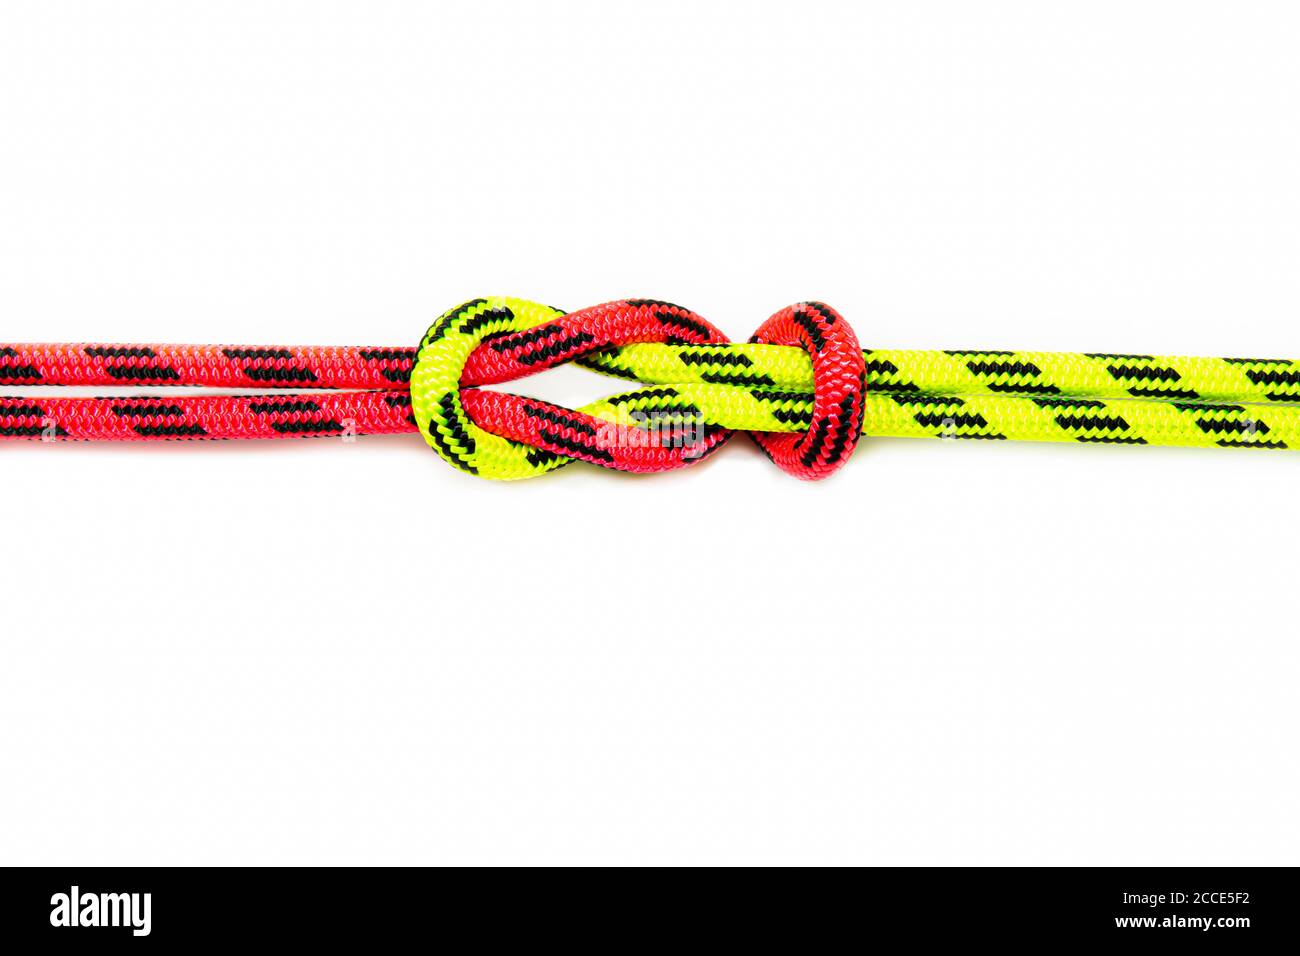 Reef, Hercules, square, double or brother hood Binding knot binding two colored red and green ropes. nautical loop used to secure rope or fishing line Stock Photo